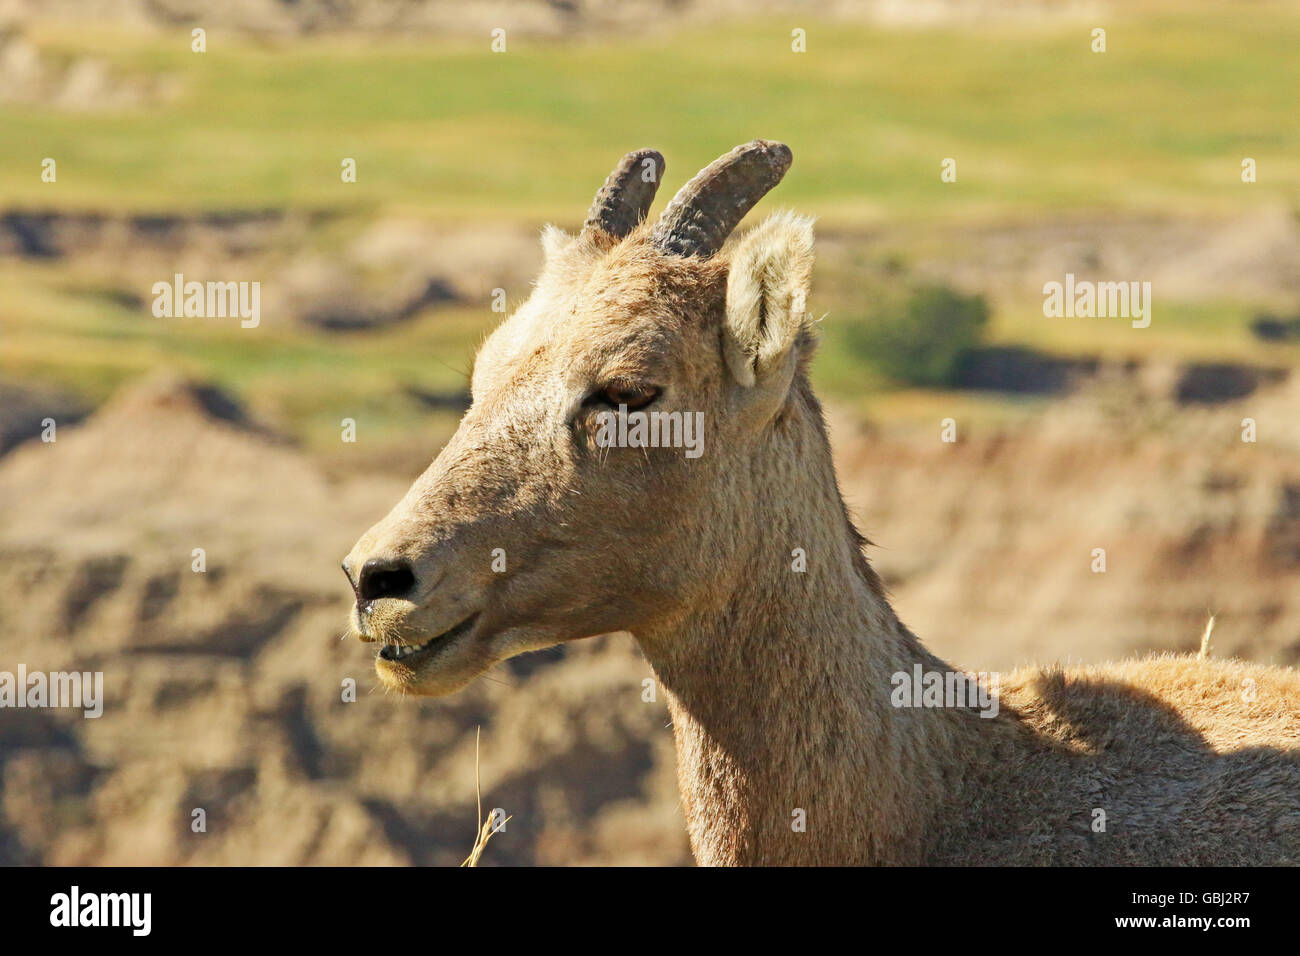 Baby Bighorn Sheep up close in the wild with the Badlands National Park of South Dakota in the background Stock Photo